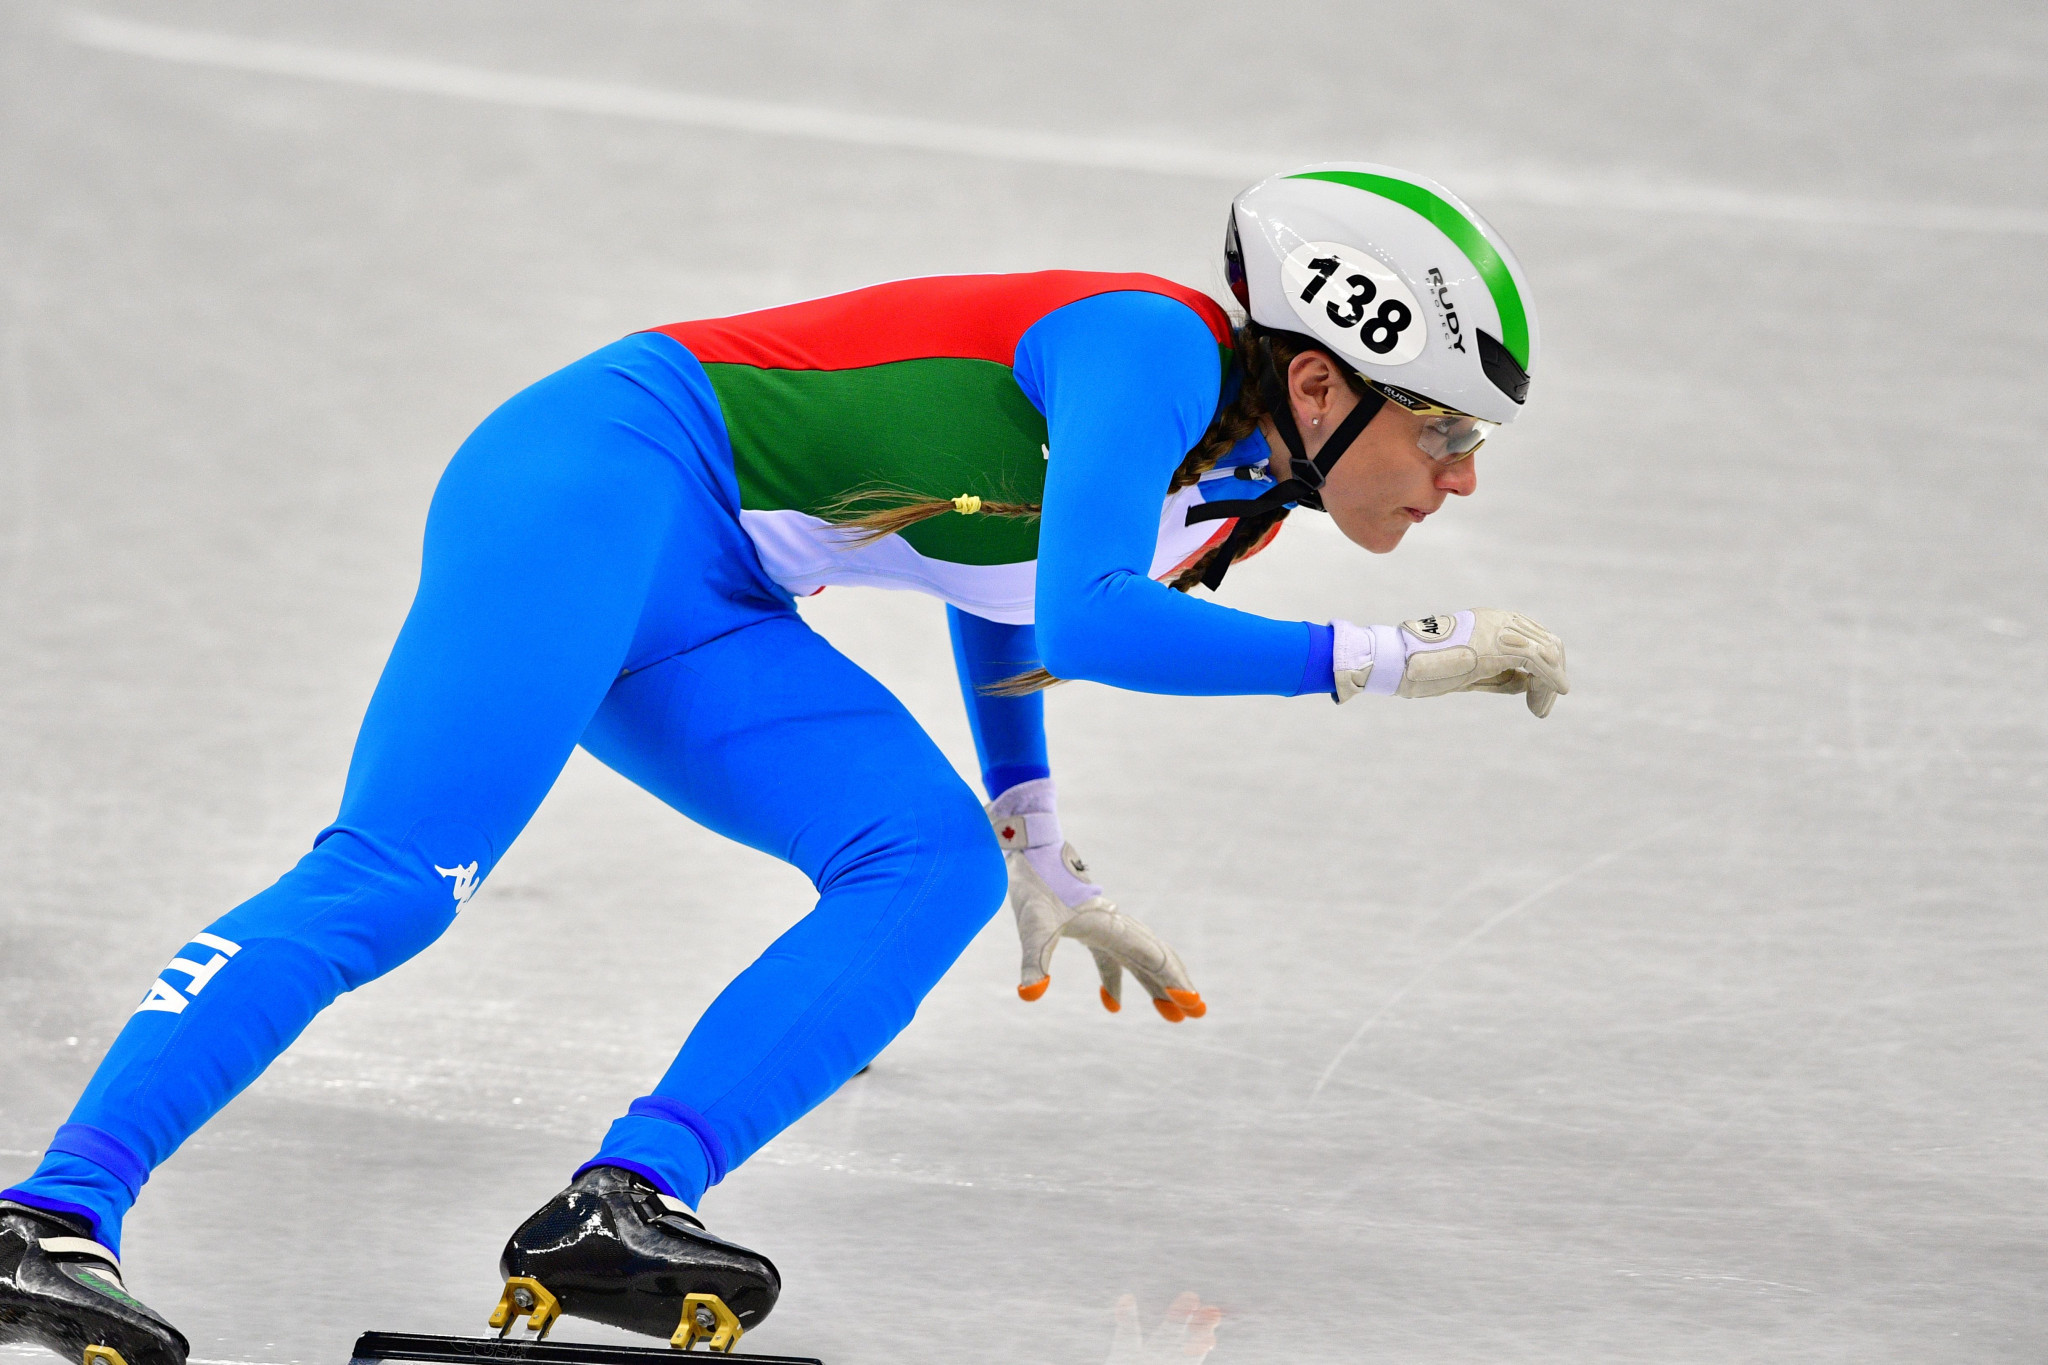 Valcepina begins home ISU Short Track World Cup with heat victory in Turin